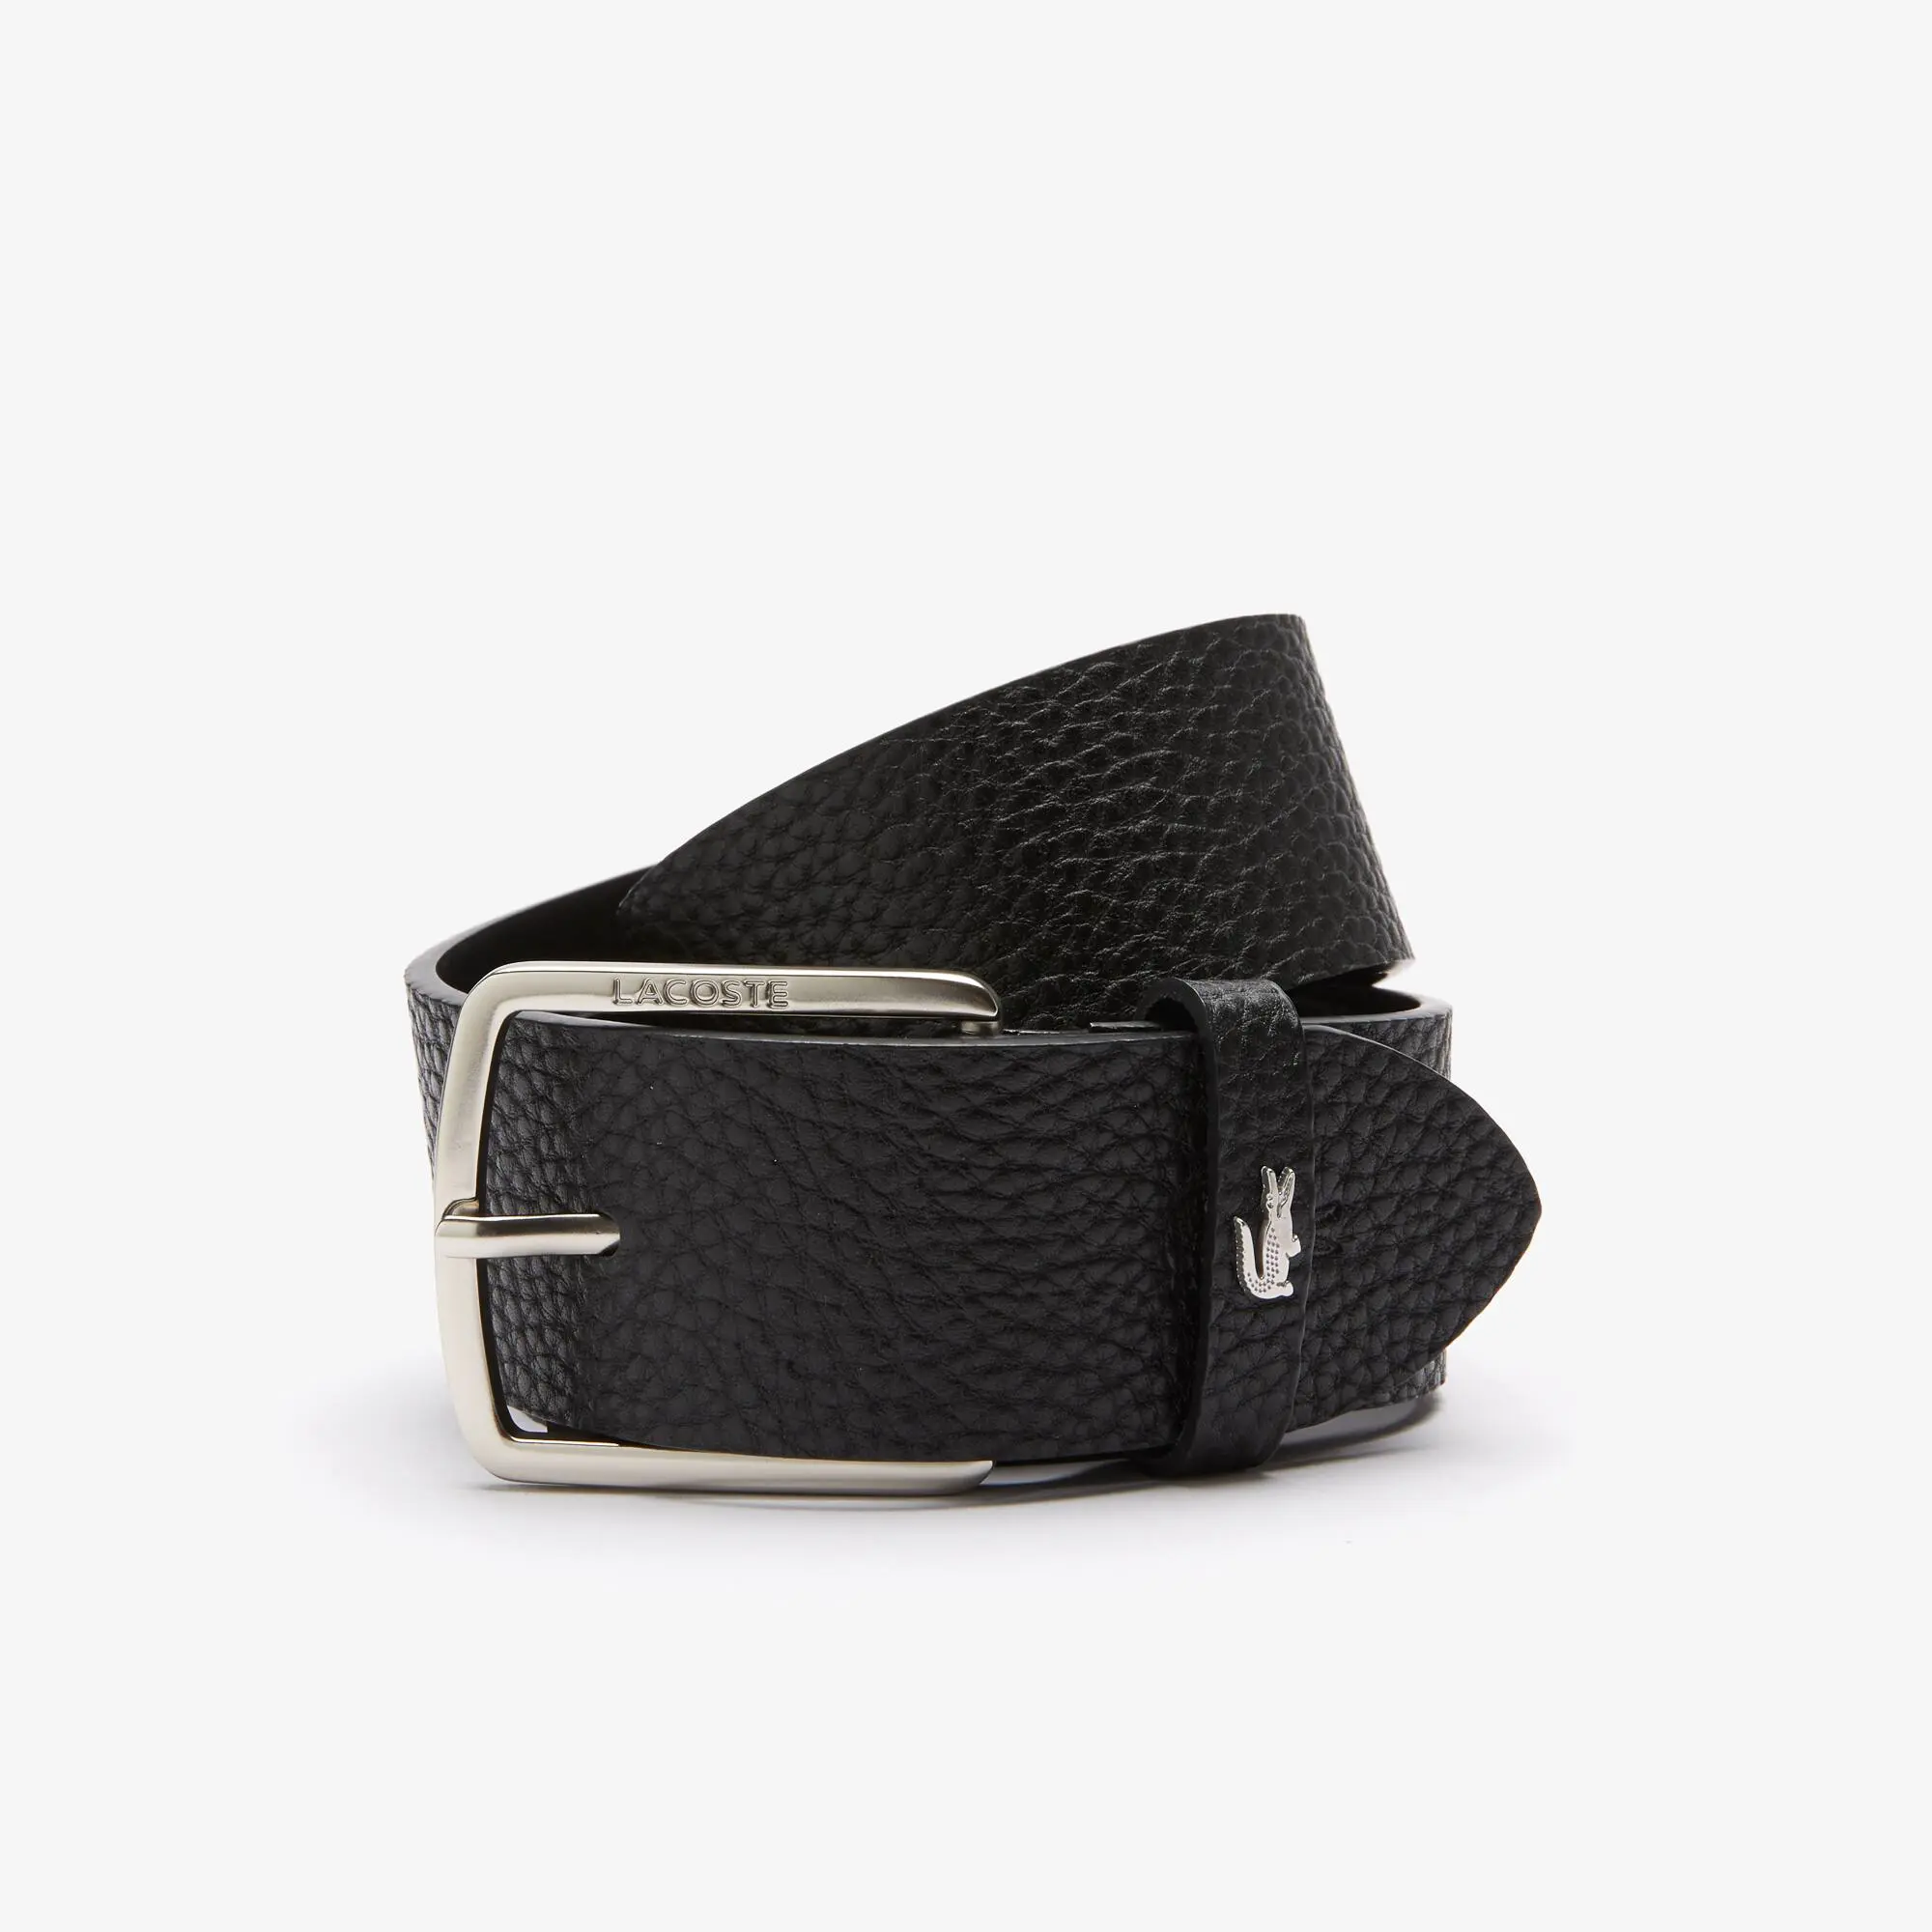 Lacoste Men's Engraved Square Buckle Grained Leather Belt. 1